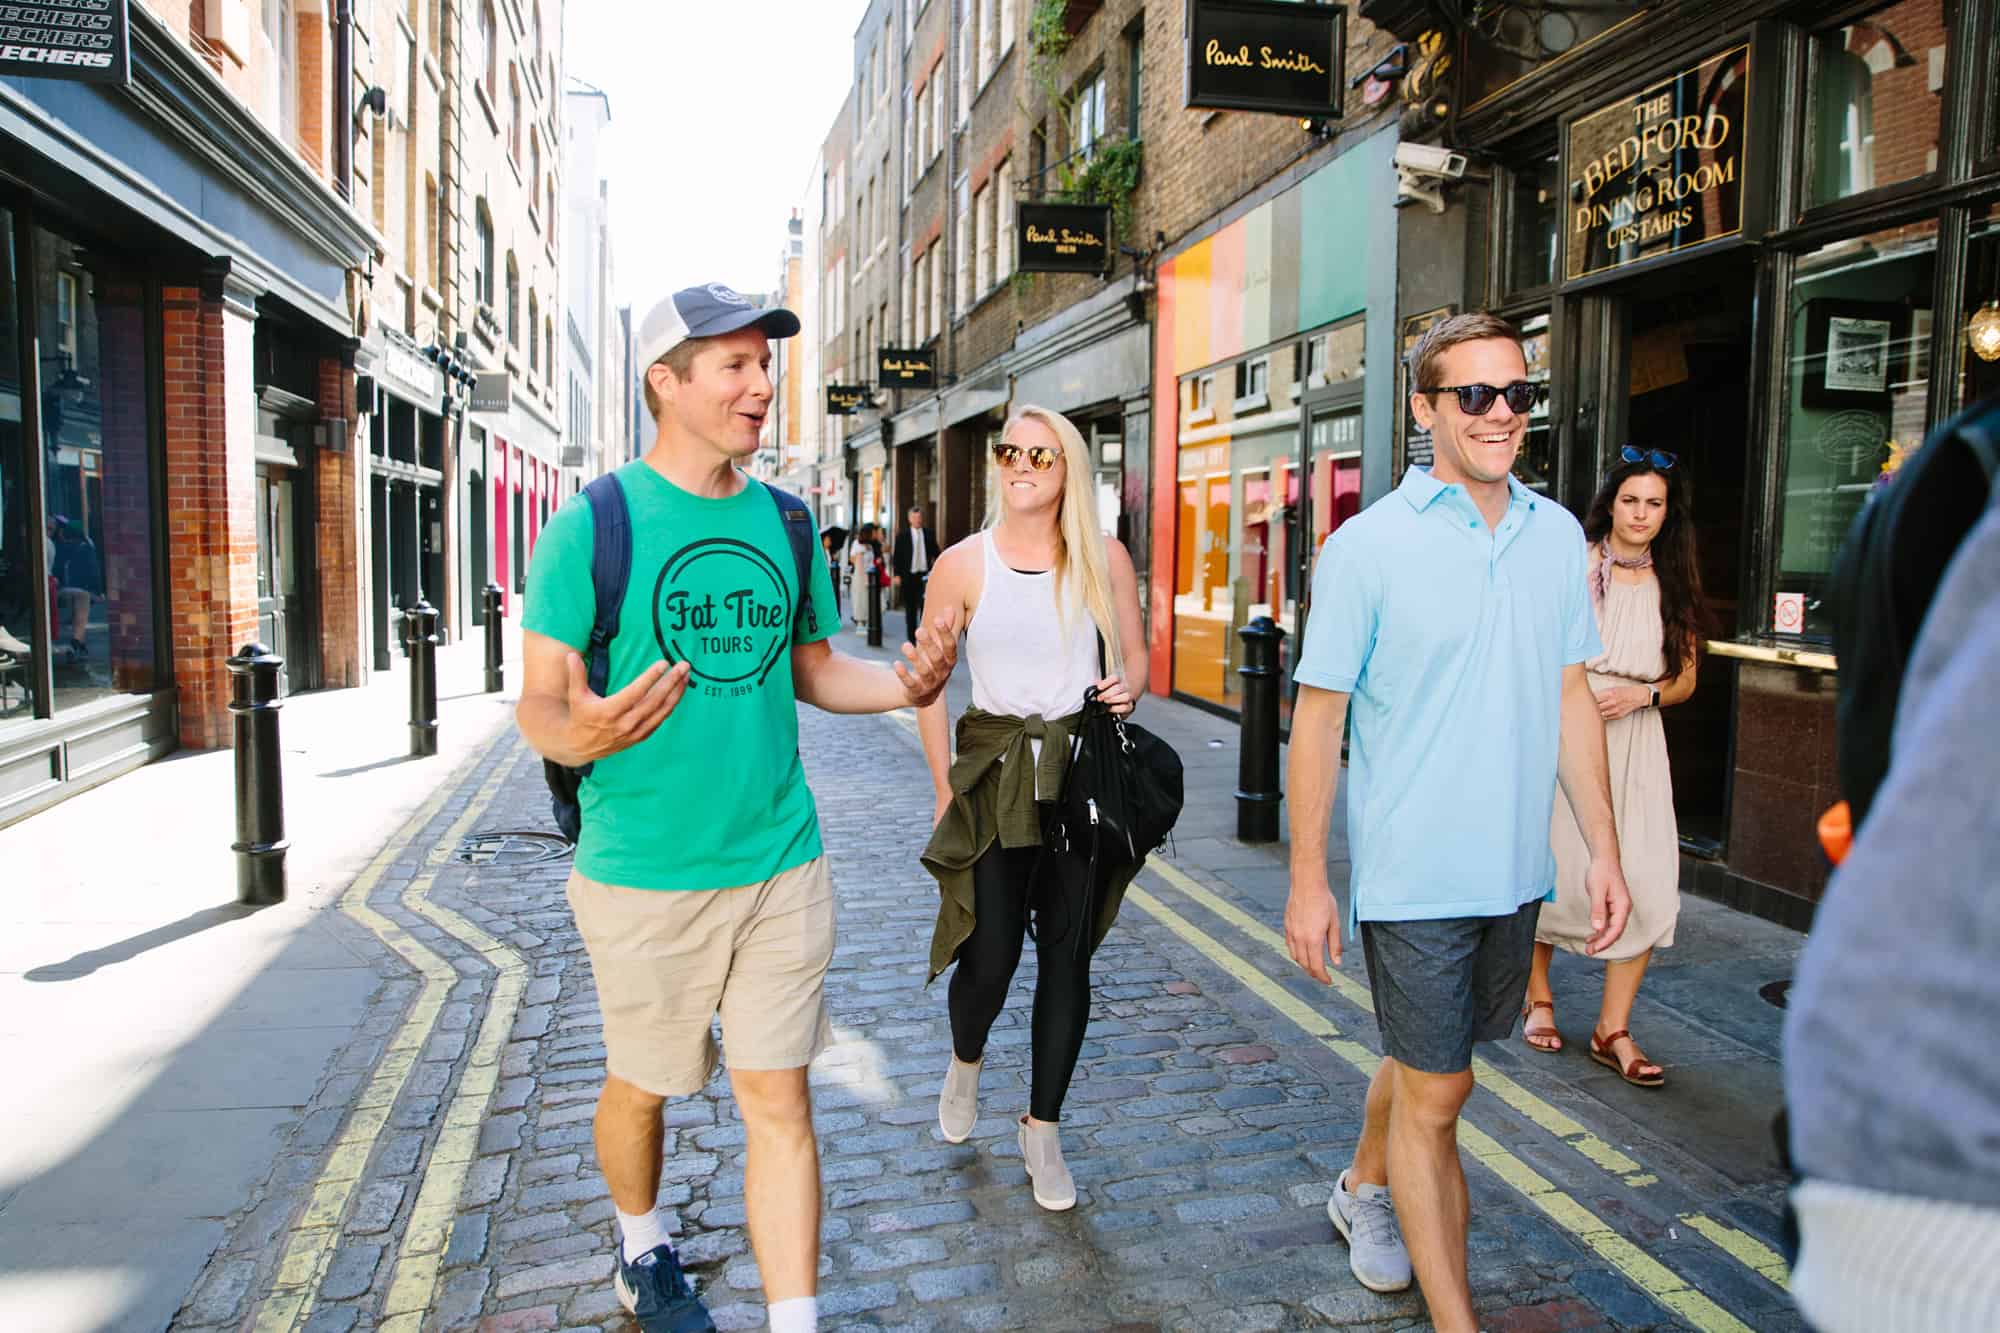 London, East End Market And Pub Tour, Highlights, London-East-End-Market-And-Pub-Tour-Local-Guide.